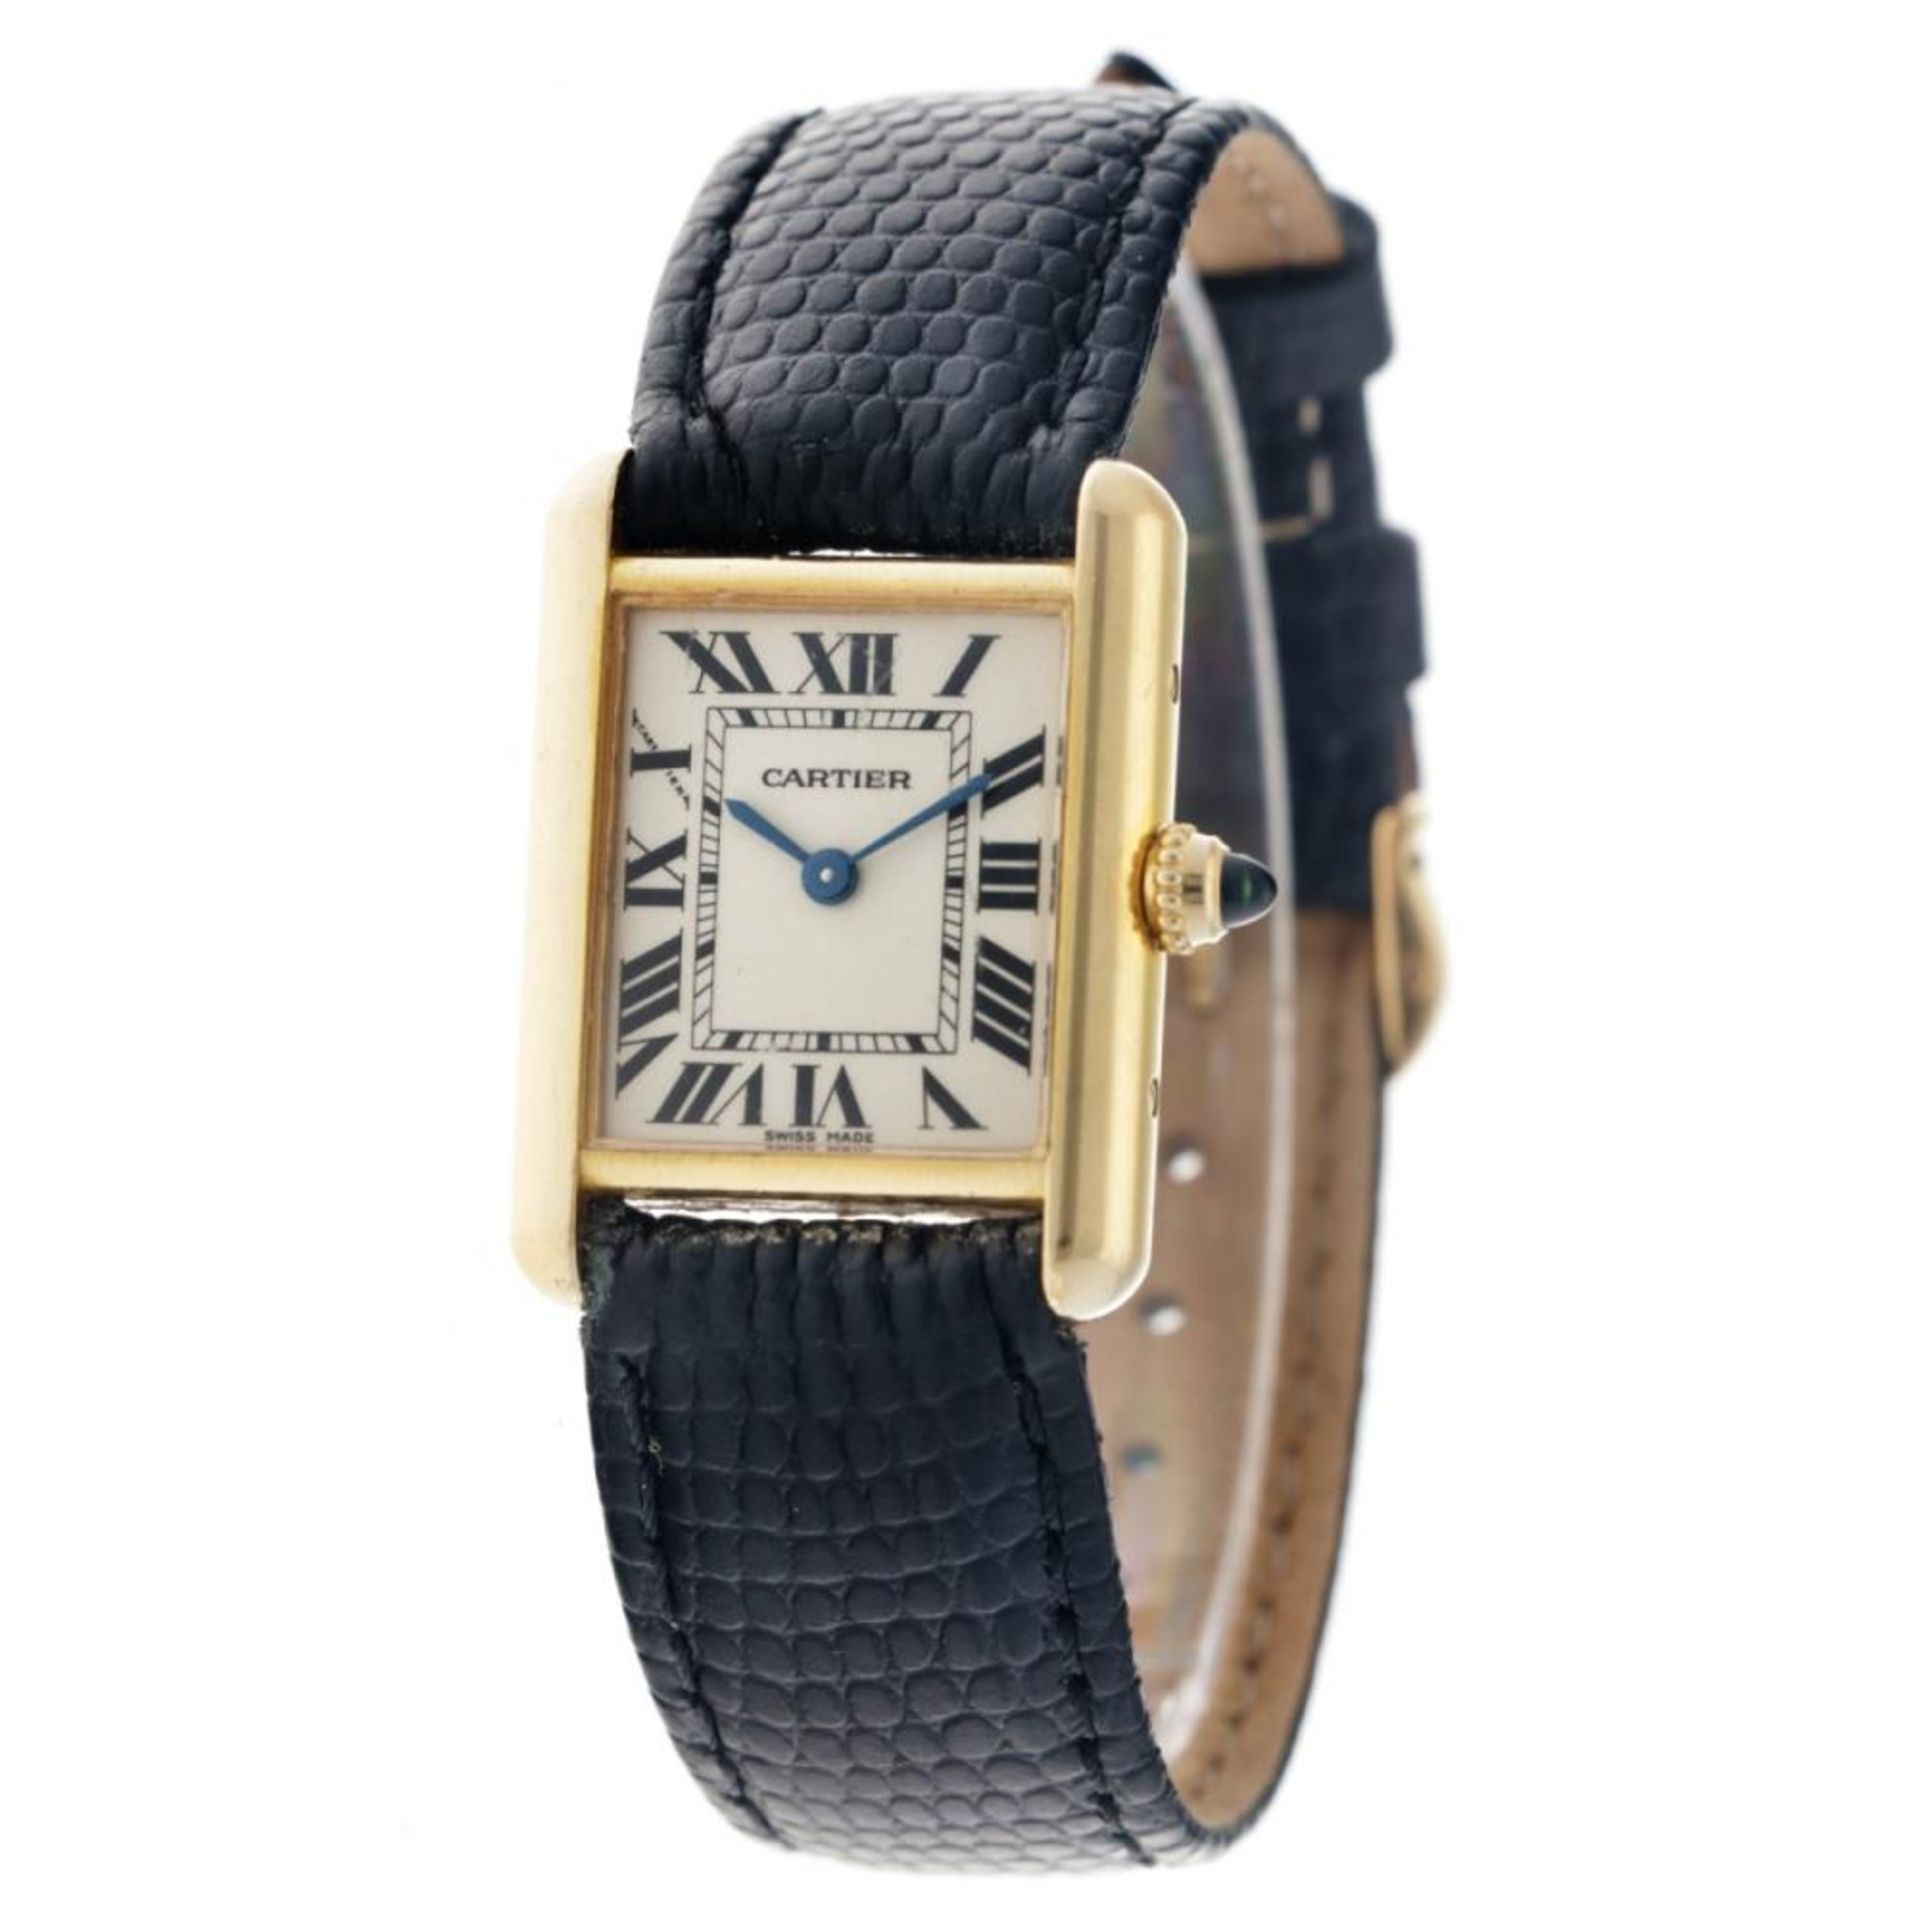 Cartier Tank Louis 2442 - 18 carat gold - Ladies watch - approx. 2010. - Image 3 of 10